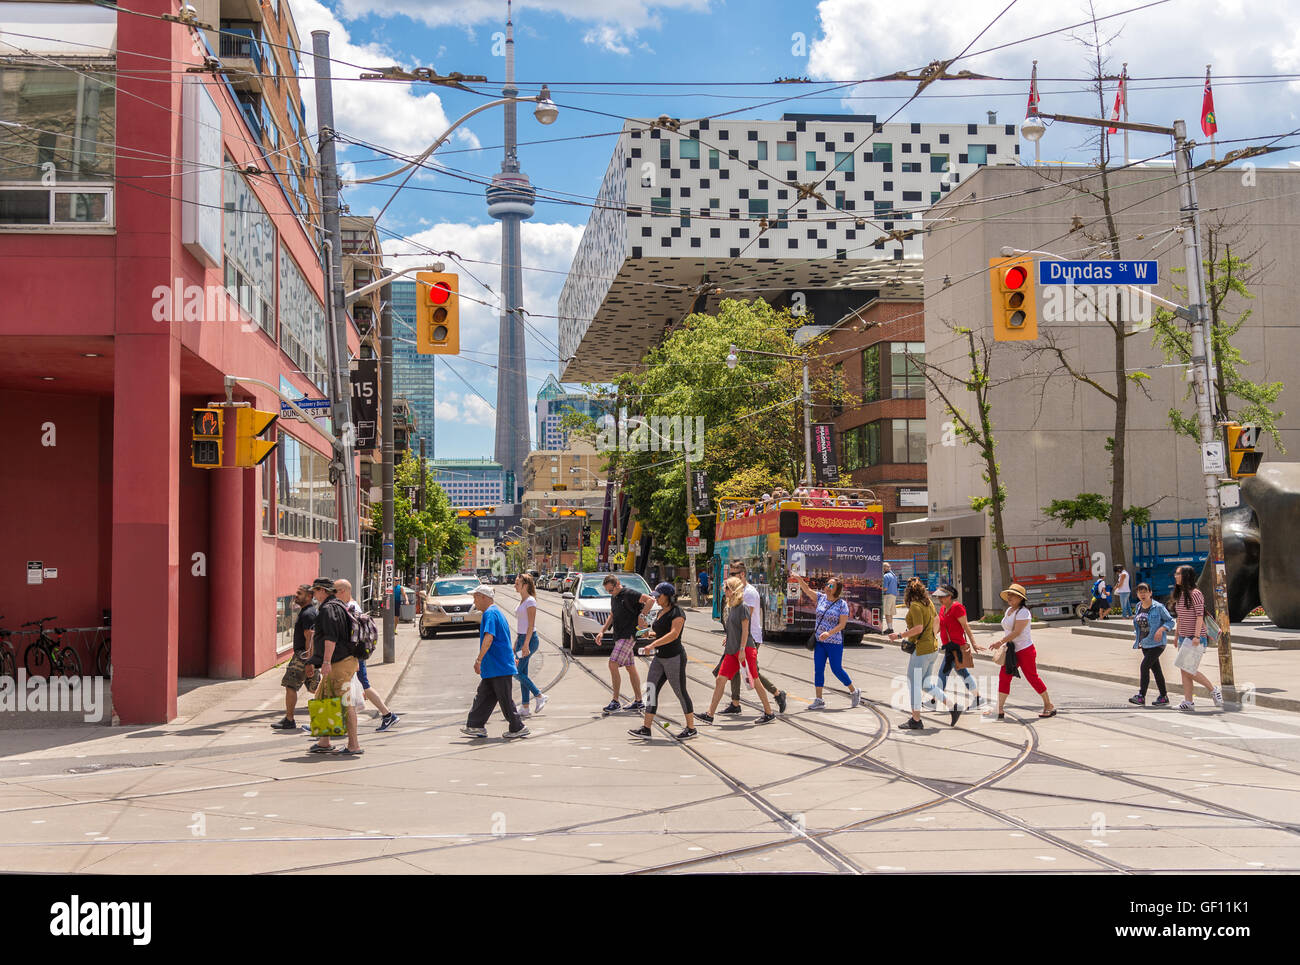 Dundas and Mccaul corner in Toronto with people walking in the crosswalk and CN tower in the background Stock Photo